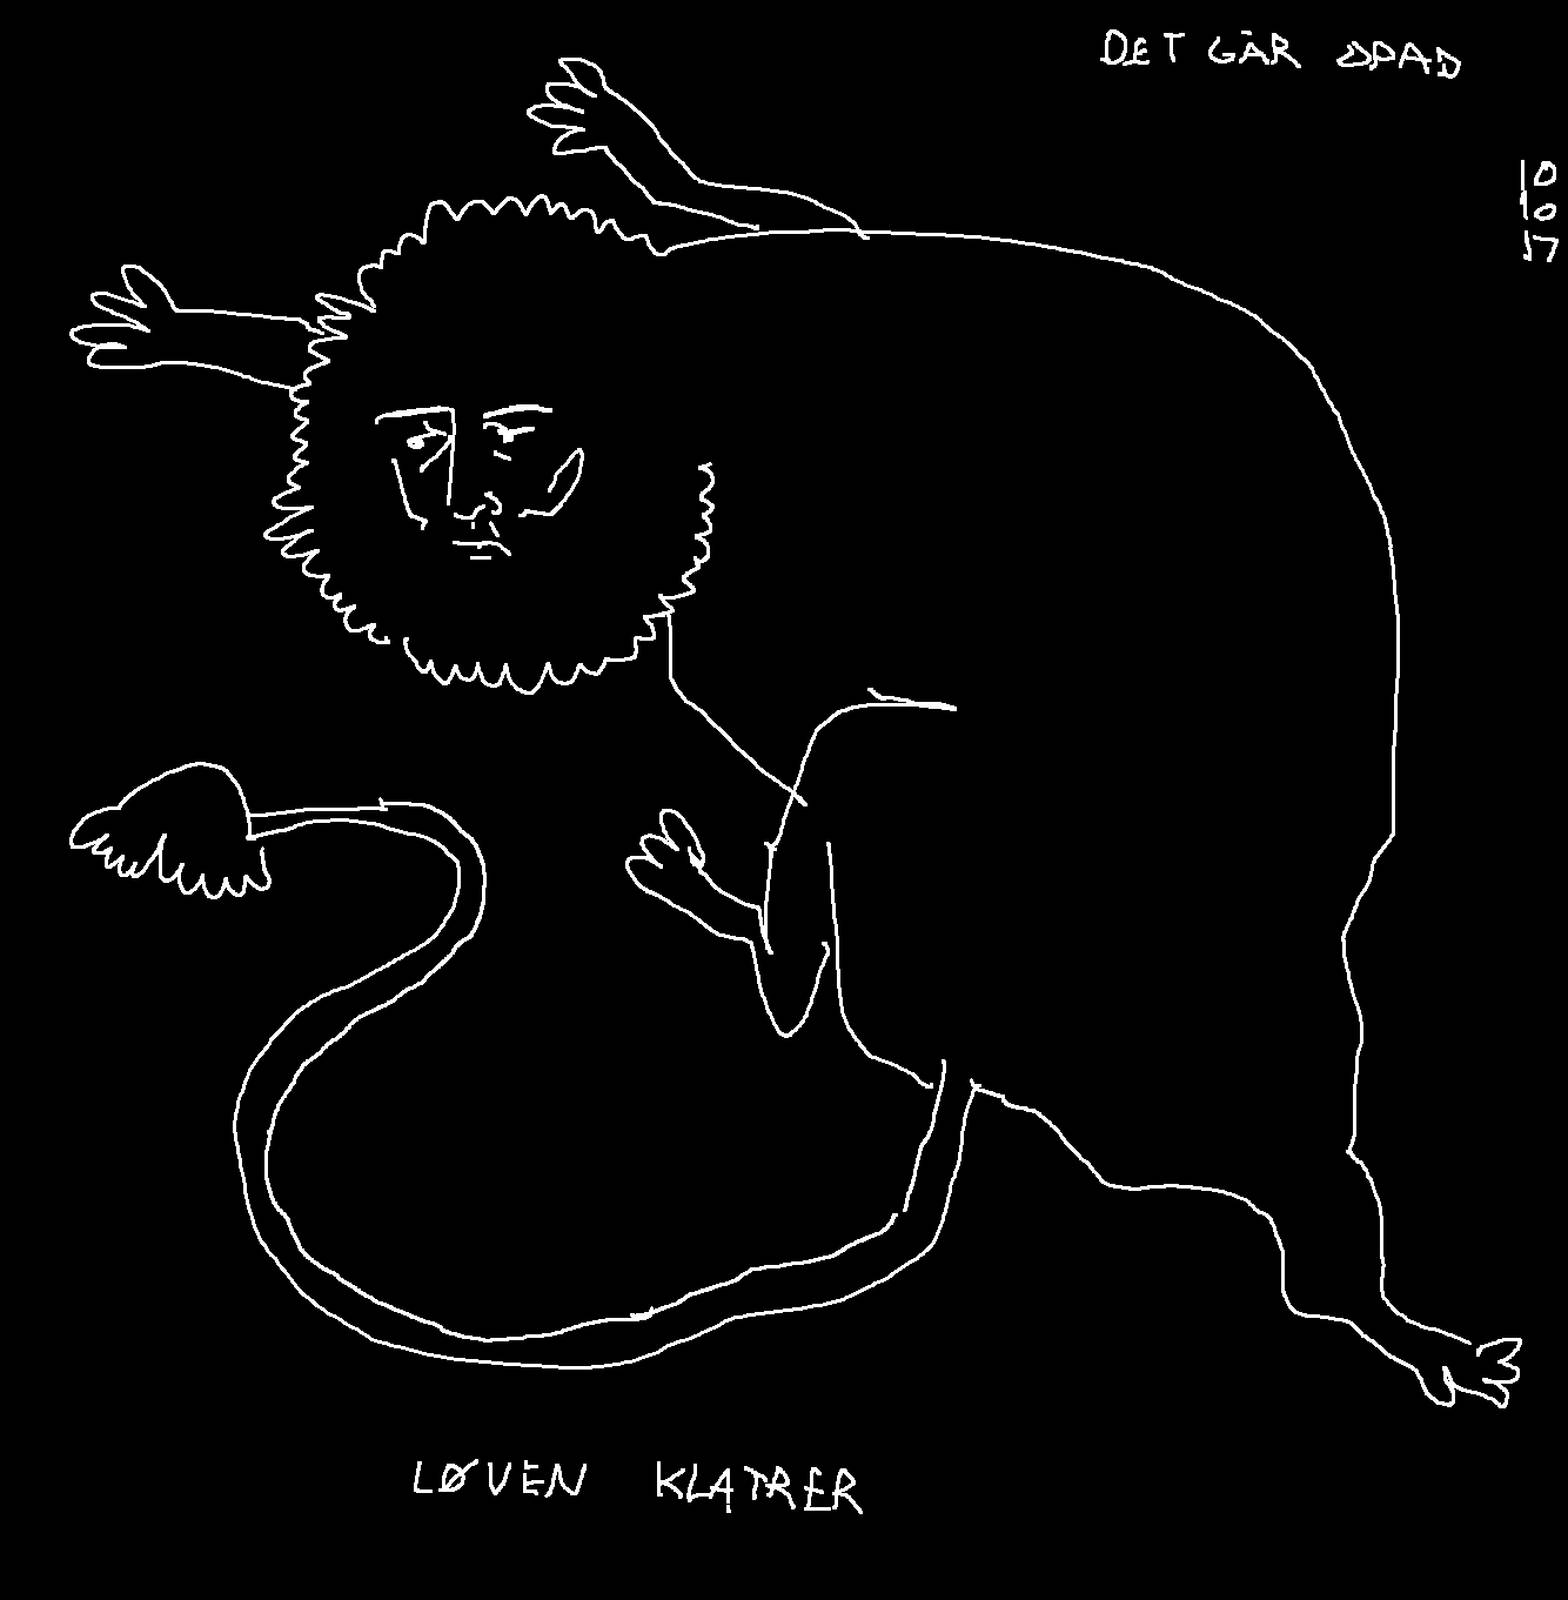 white lines on black background, a strangely posed lion with a human face. Text reads, translated: It goes upwards. The lion is climbing